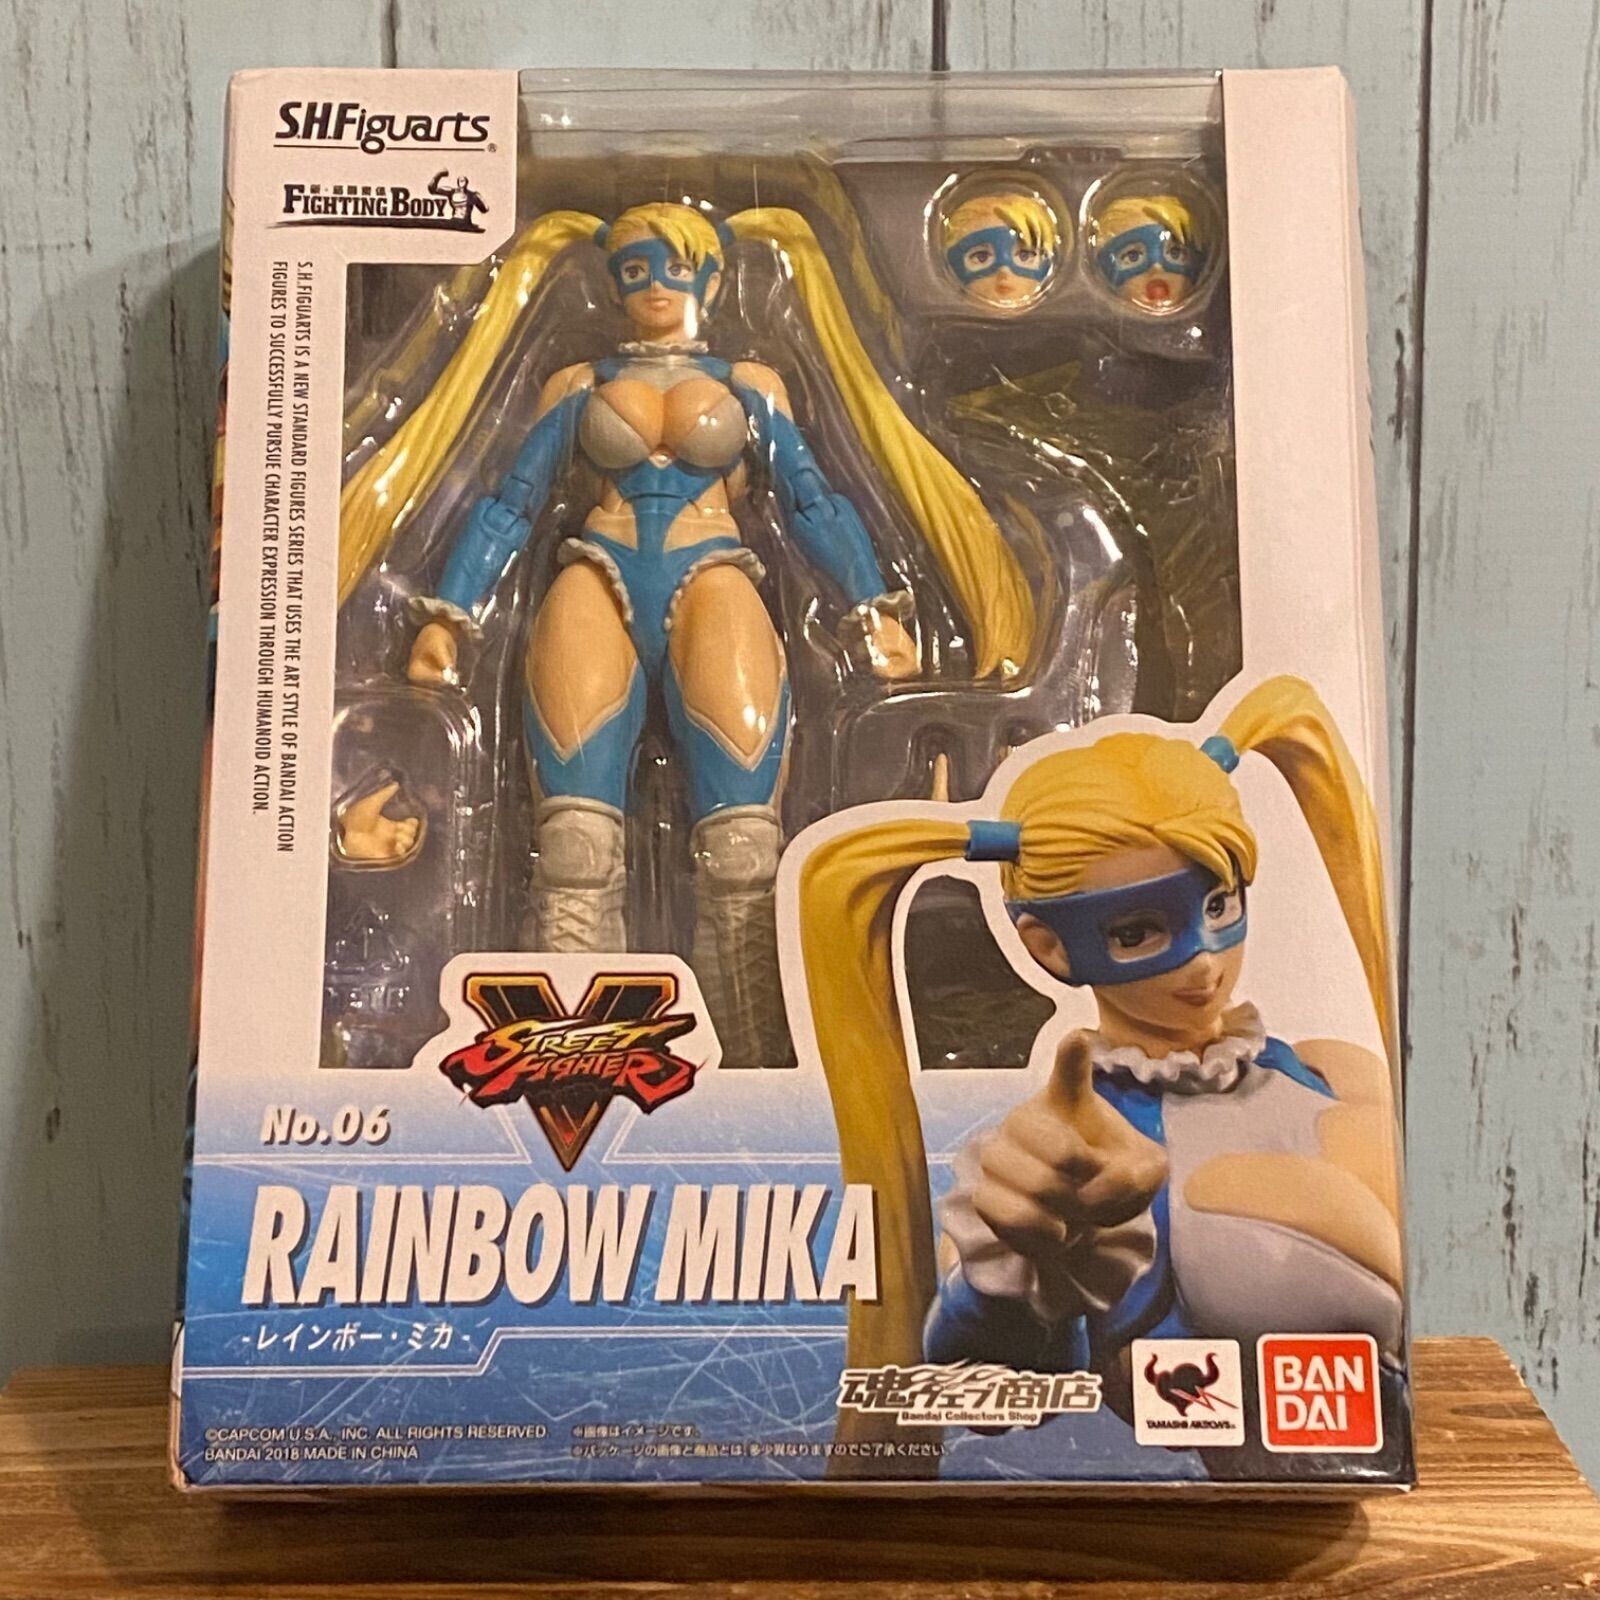 Bandai S.H. Figuarts Street Fighter V Rainbow Mika Action Figure